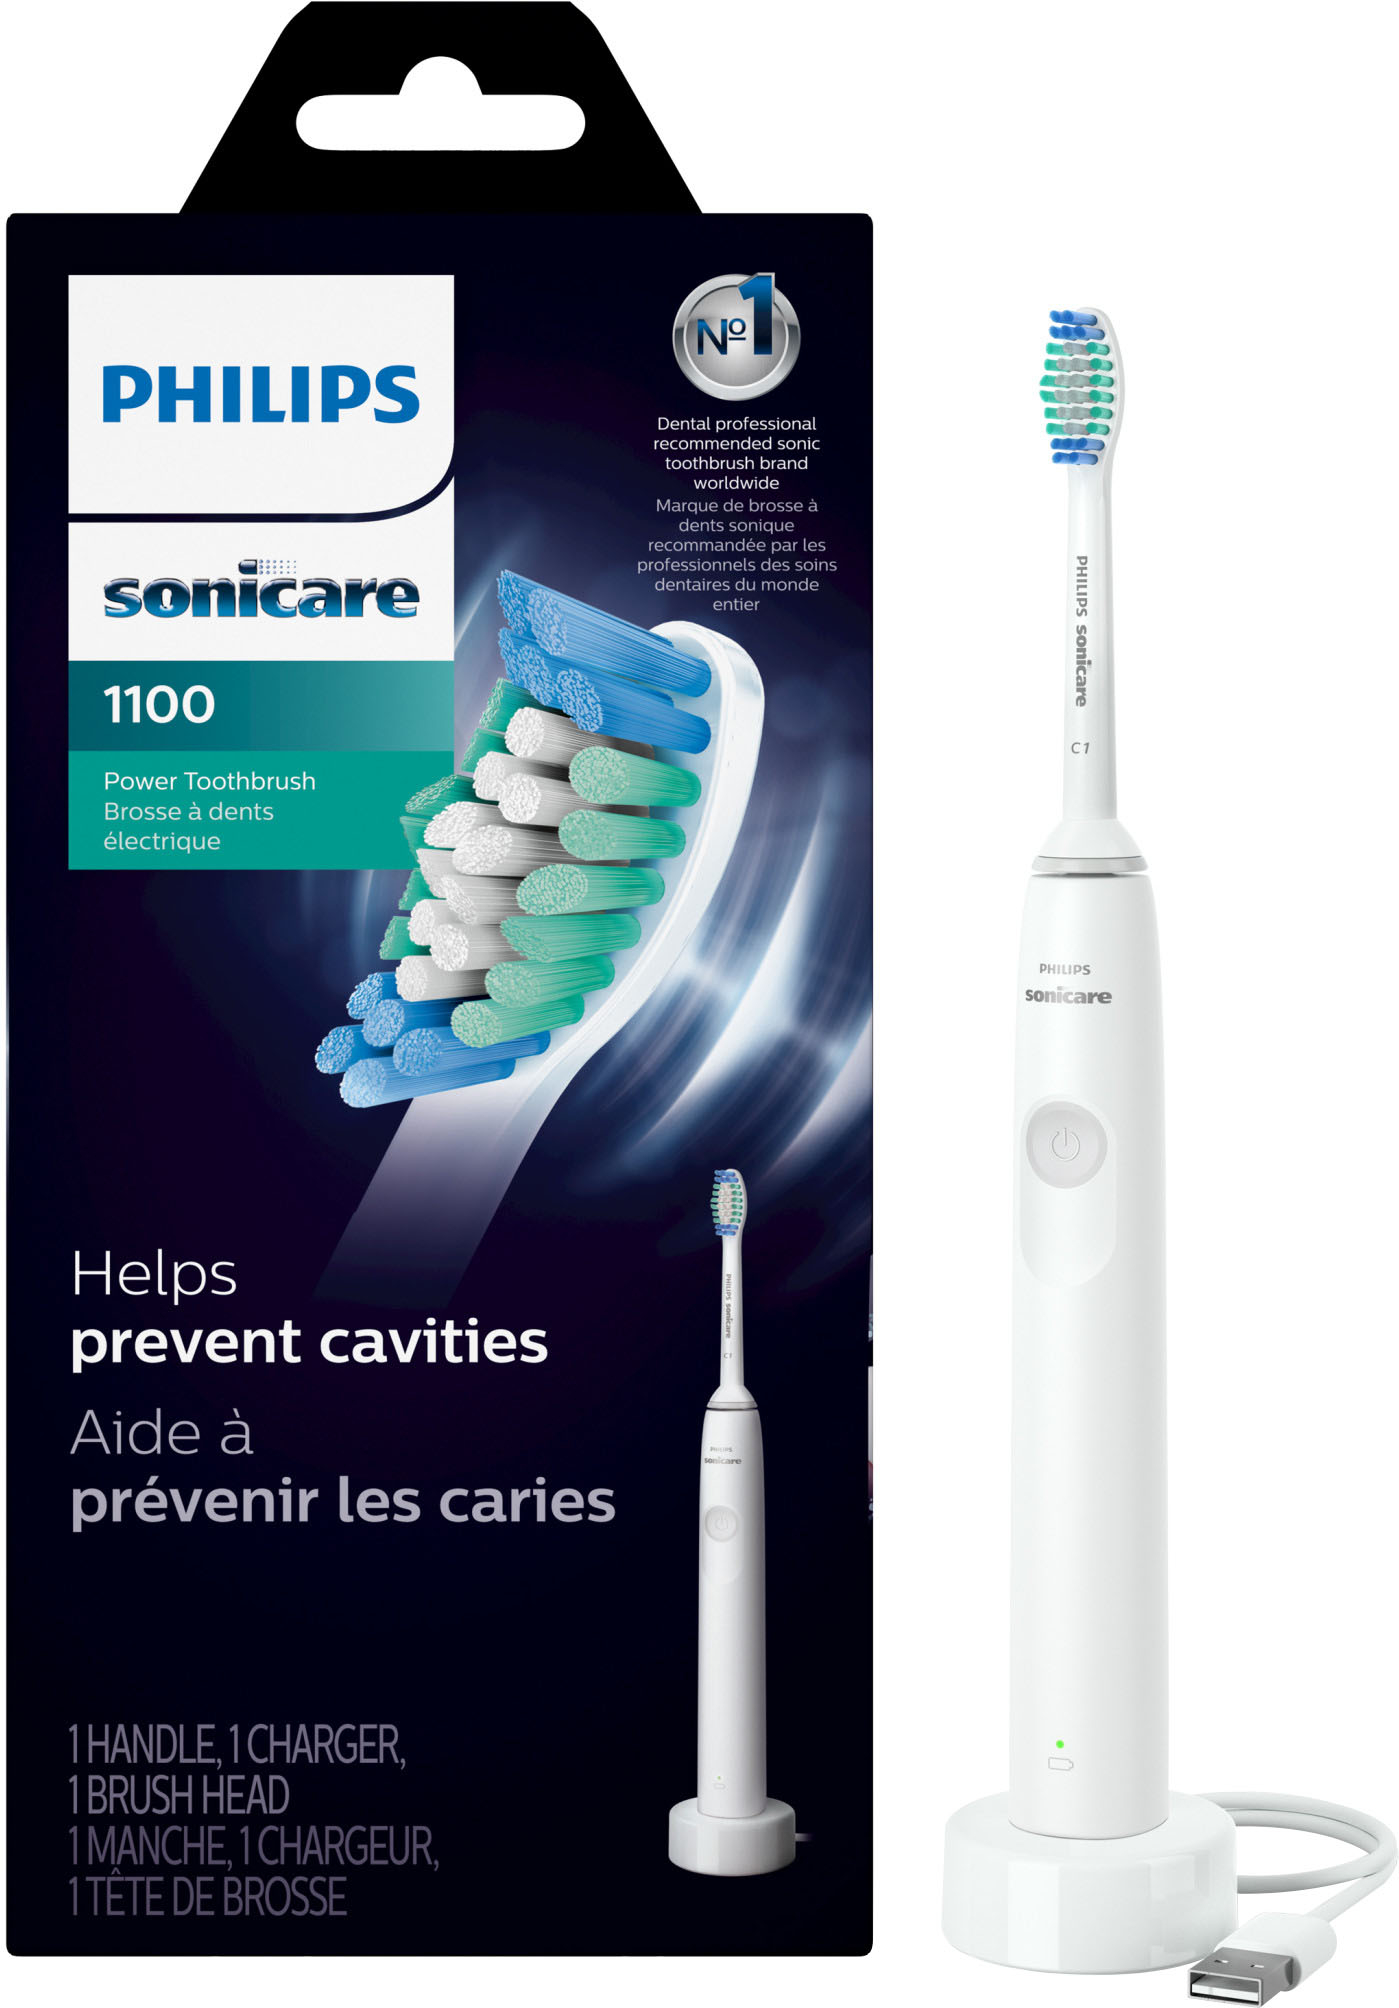 Angle View: Philips Sonicare - 1100 Power Toothbrush, Rechargeable Electric Toothbrush - White Grey